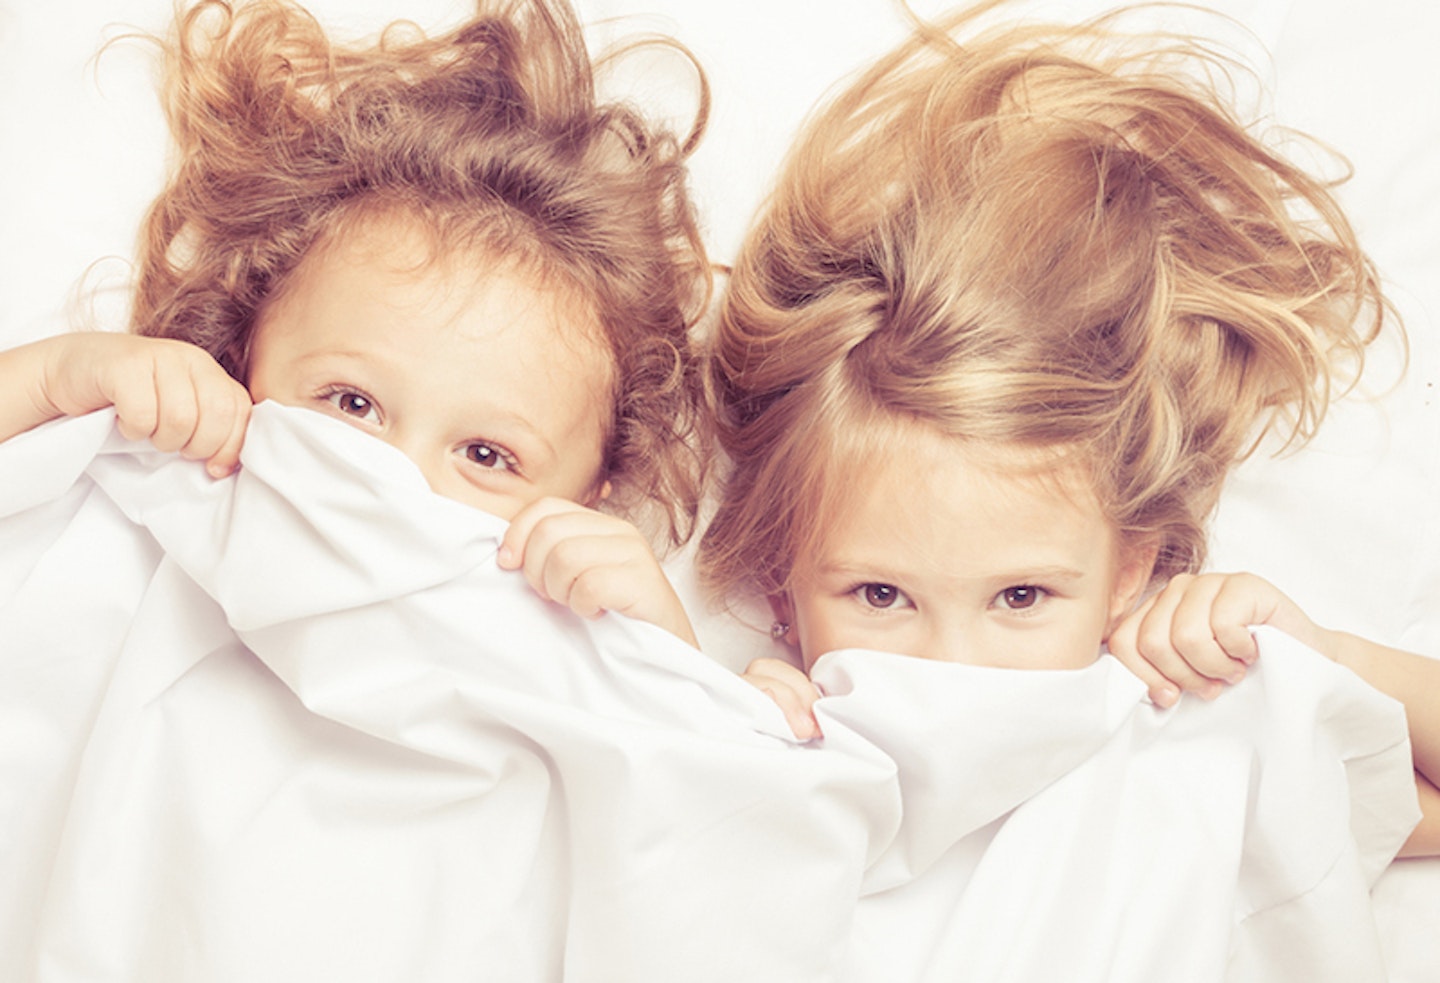 You should be putting your kids to bed at this time according to science